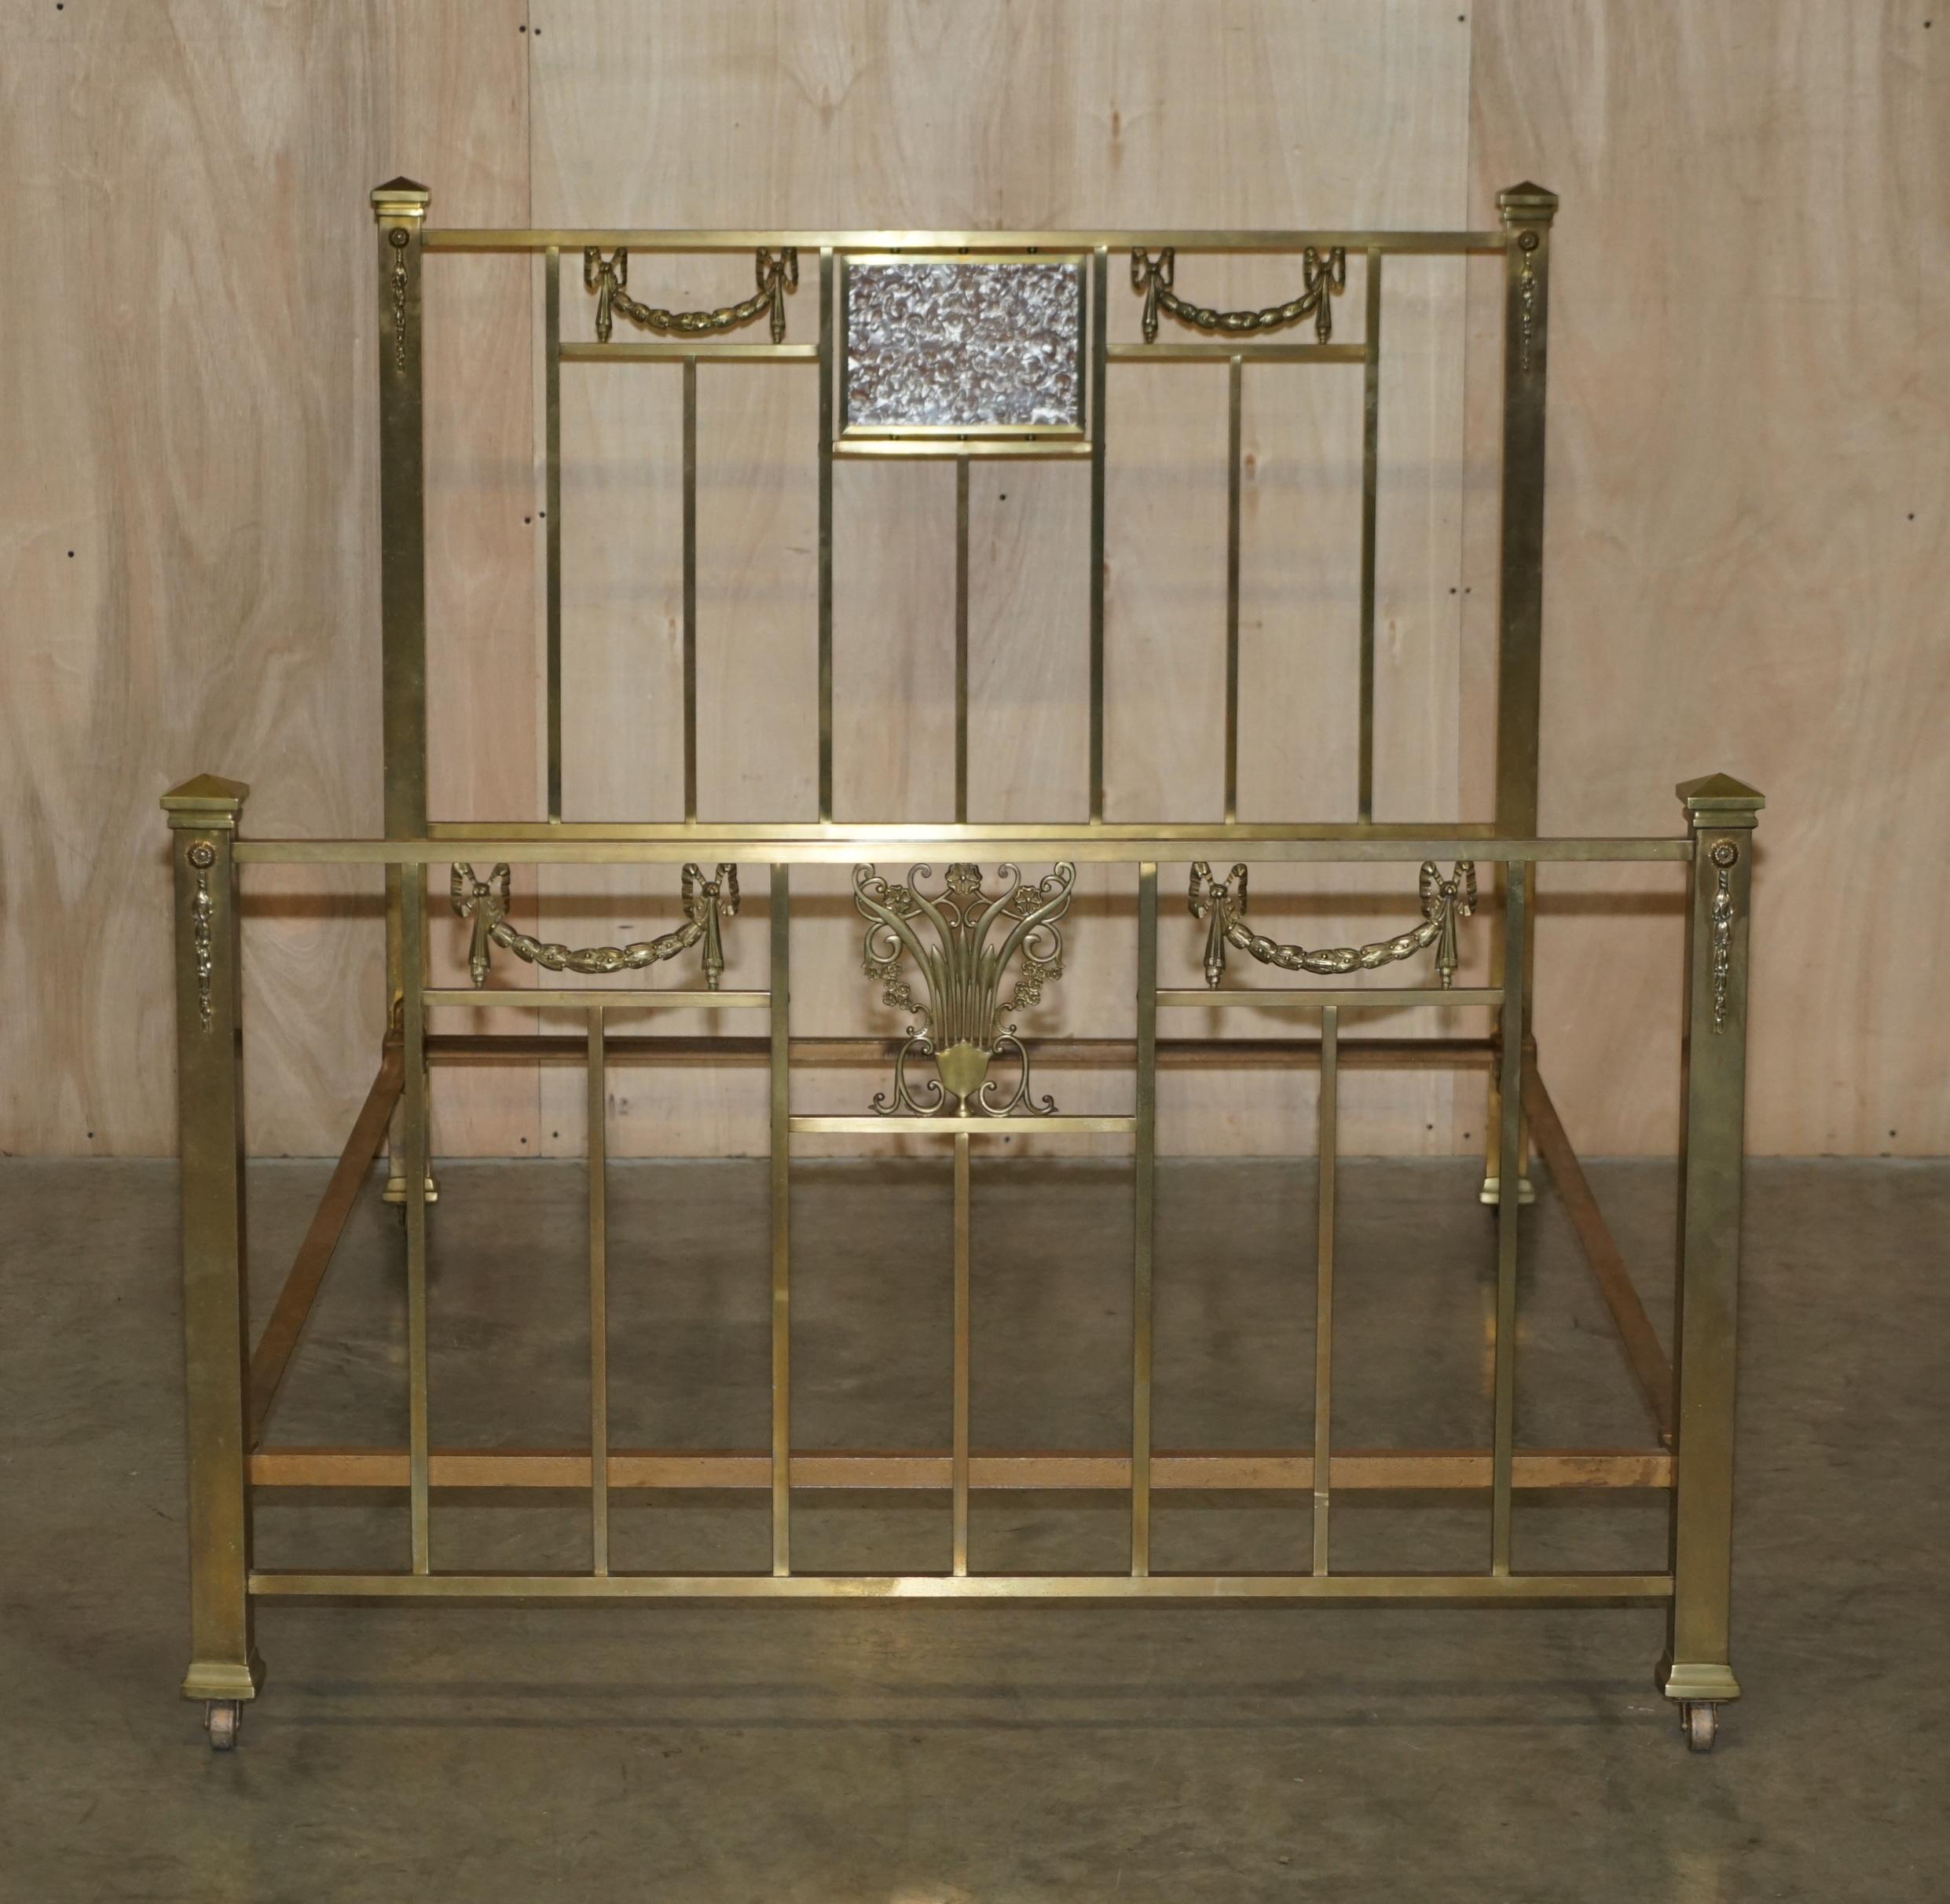 We are delighted to offer for sale this very rare original circa 1880 Victorian Brass double bed frame with Mother of Pearl style inset panel 

These beds are about as rare and collectable as they come, the frame is all original, it has